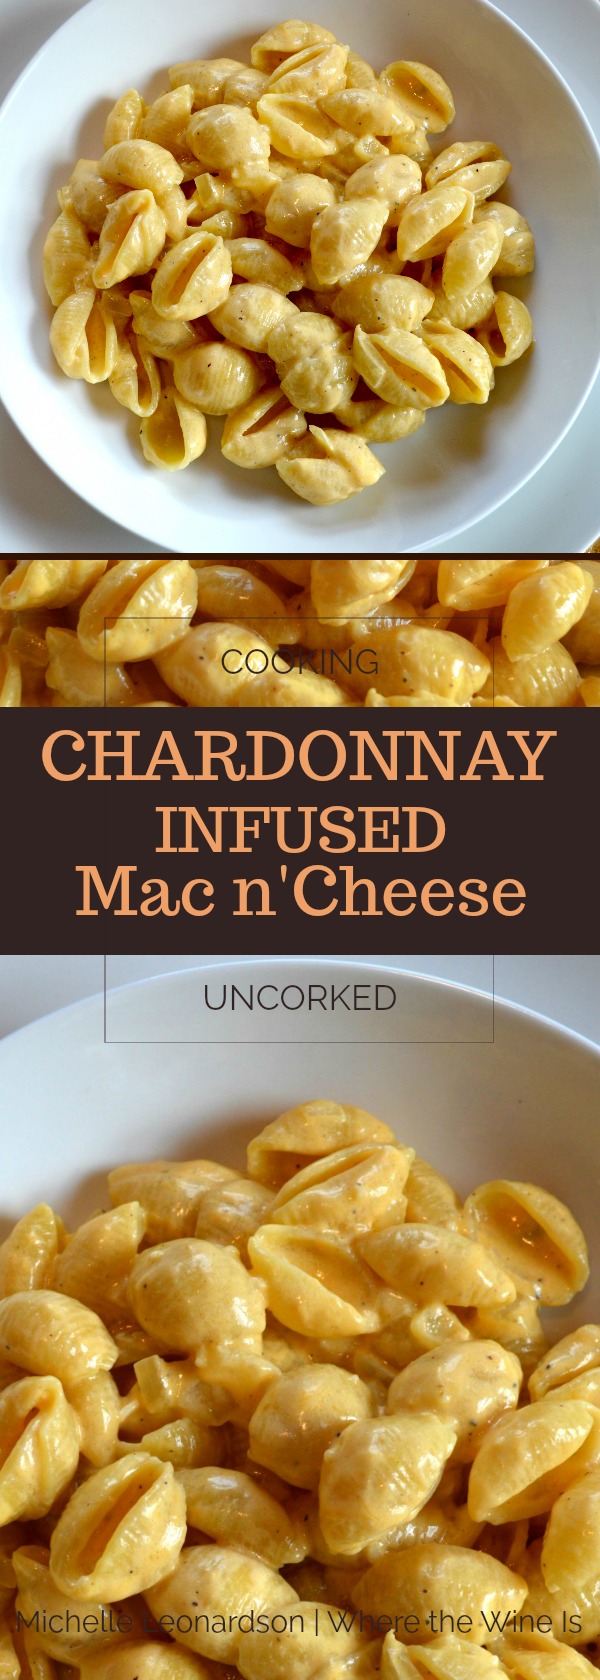 Treat yourself to a little indulgence! This is the BEST macaroni and cheese recipe! Make this delicious Chardonnay Infused Mac n' Cheese tonight!